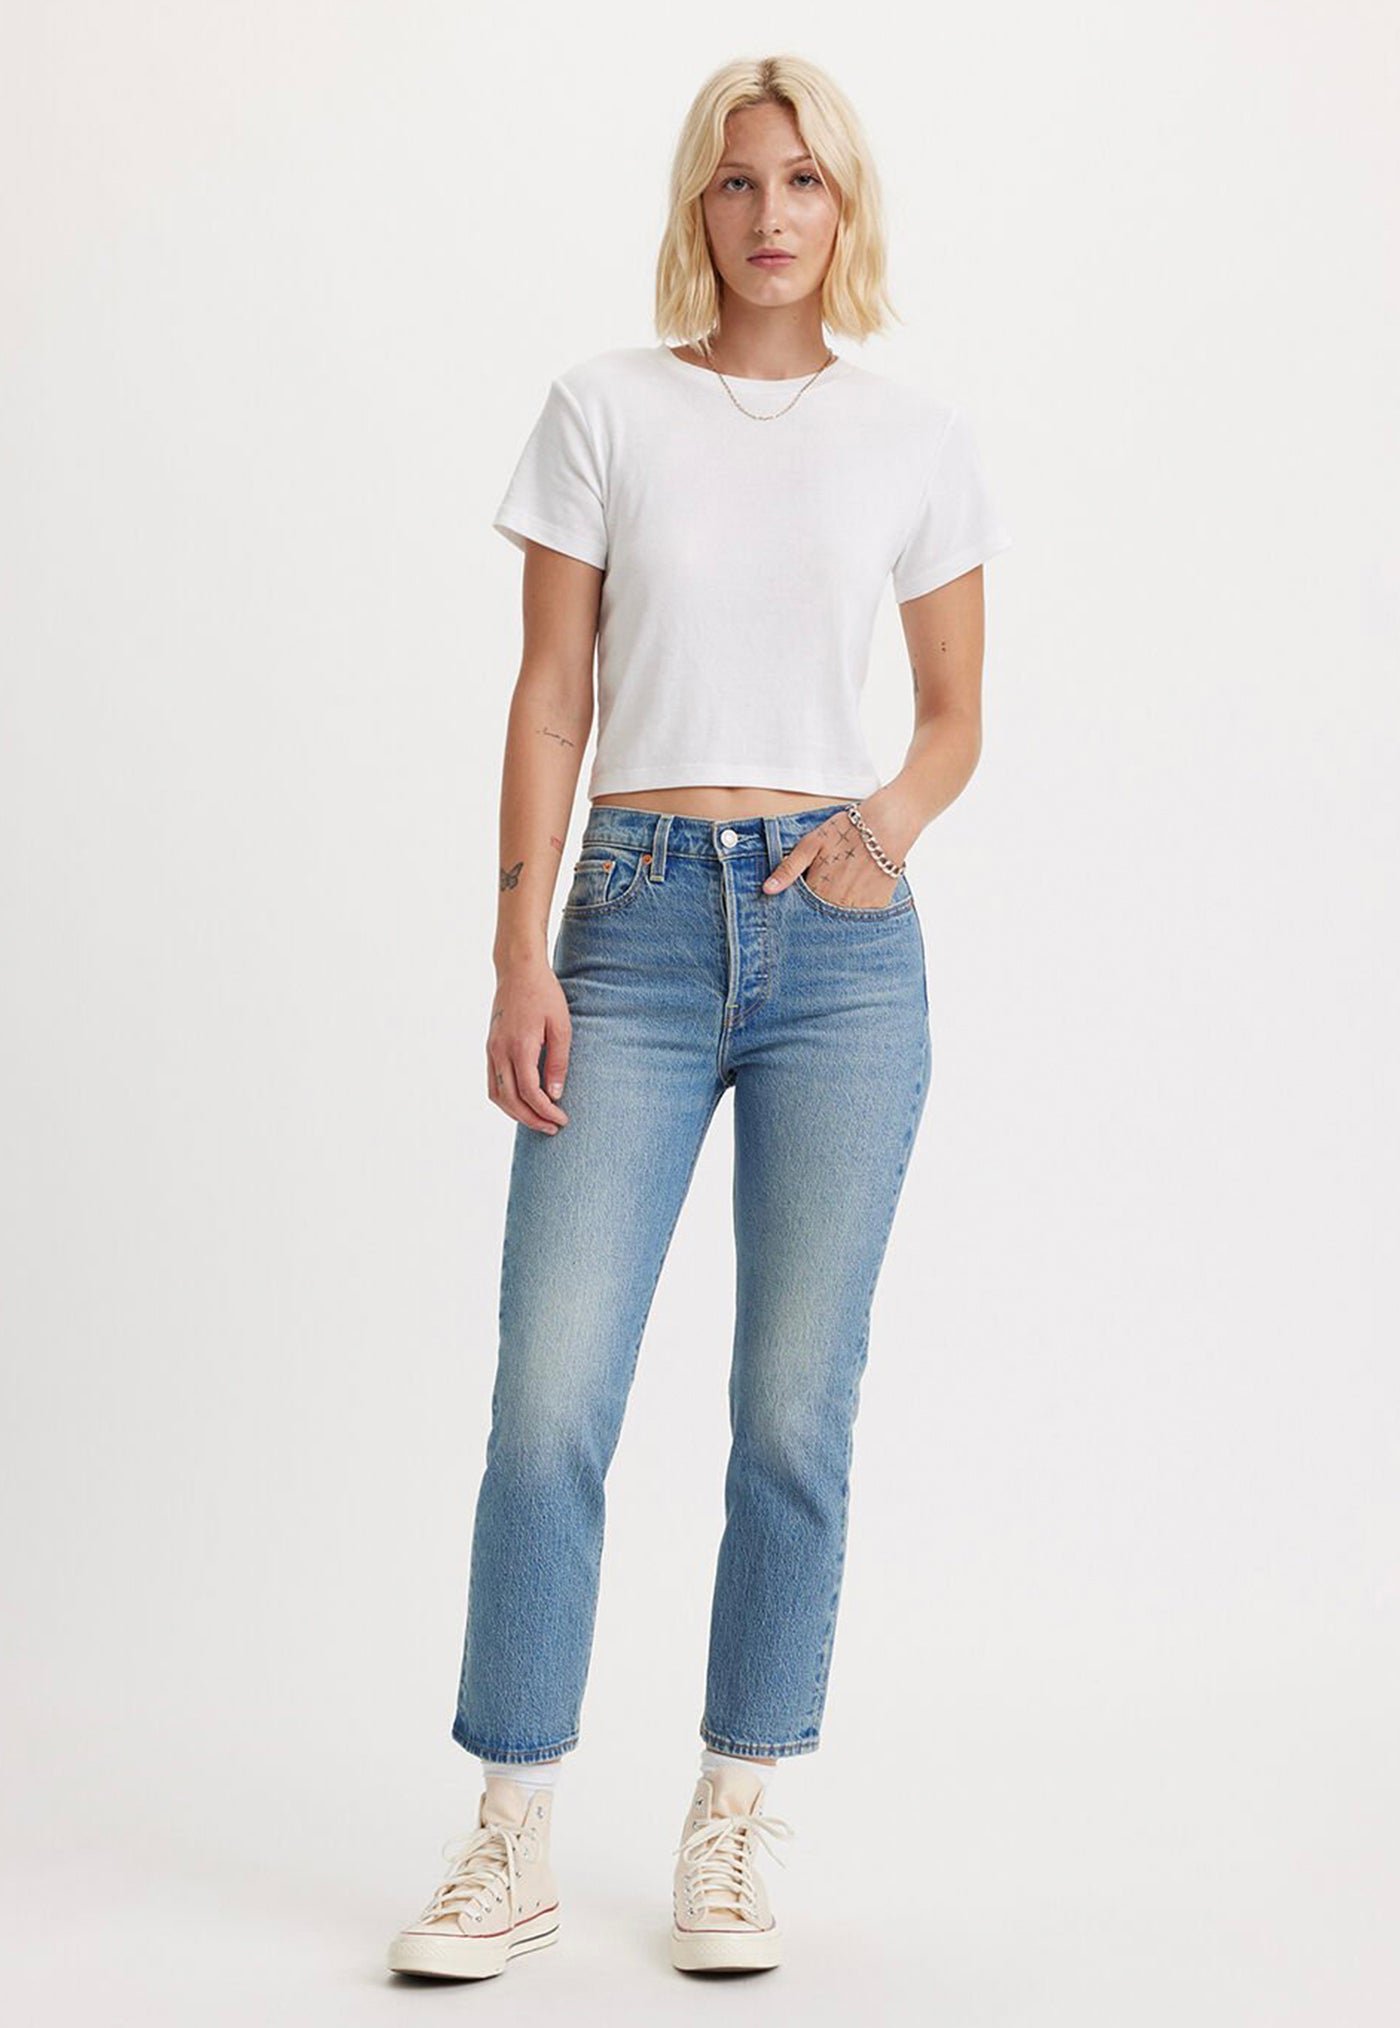 Wedgie Straight Jeans - Calling All Blues sold by Angel Divine